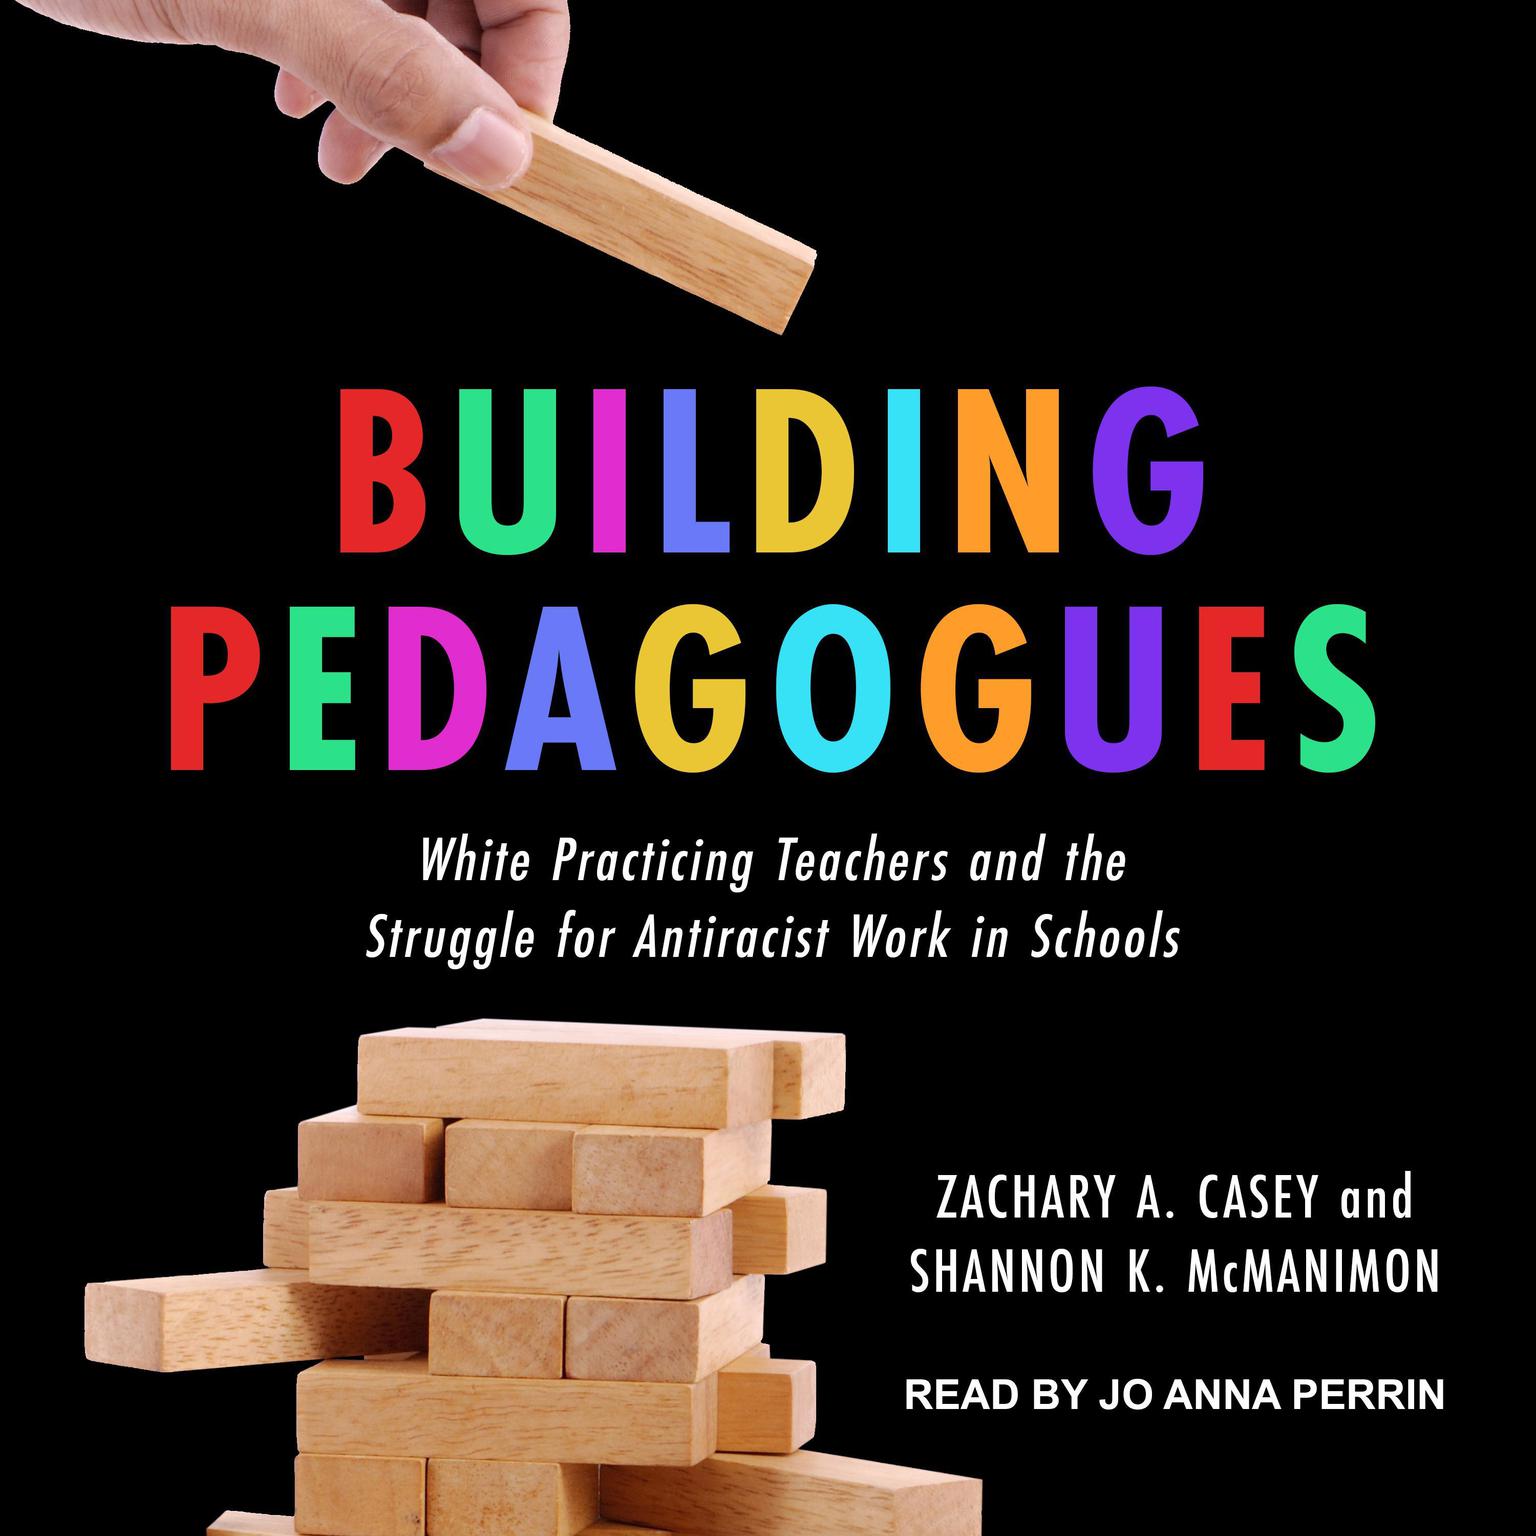 Building Pedagogues: White Practicing Teachers and the Struggle for Antiracist Work in Schools Audiobook, by Shannon K. McManimon